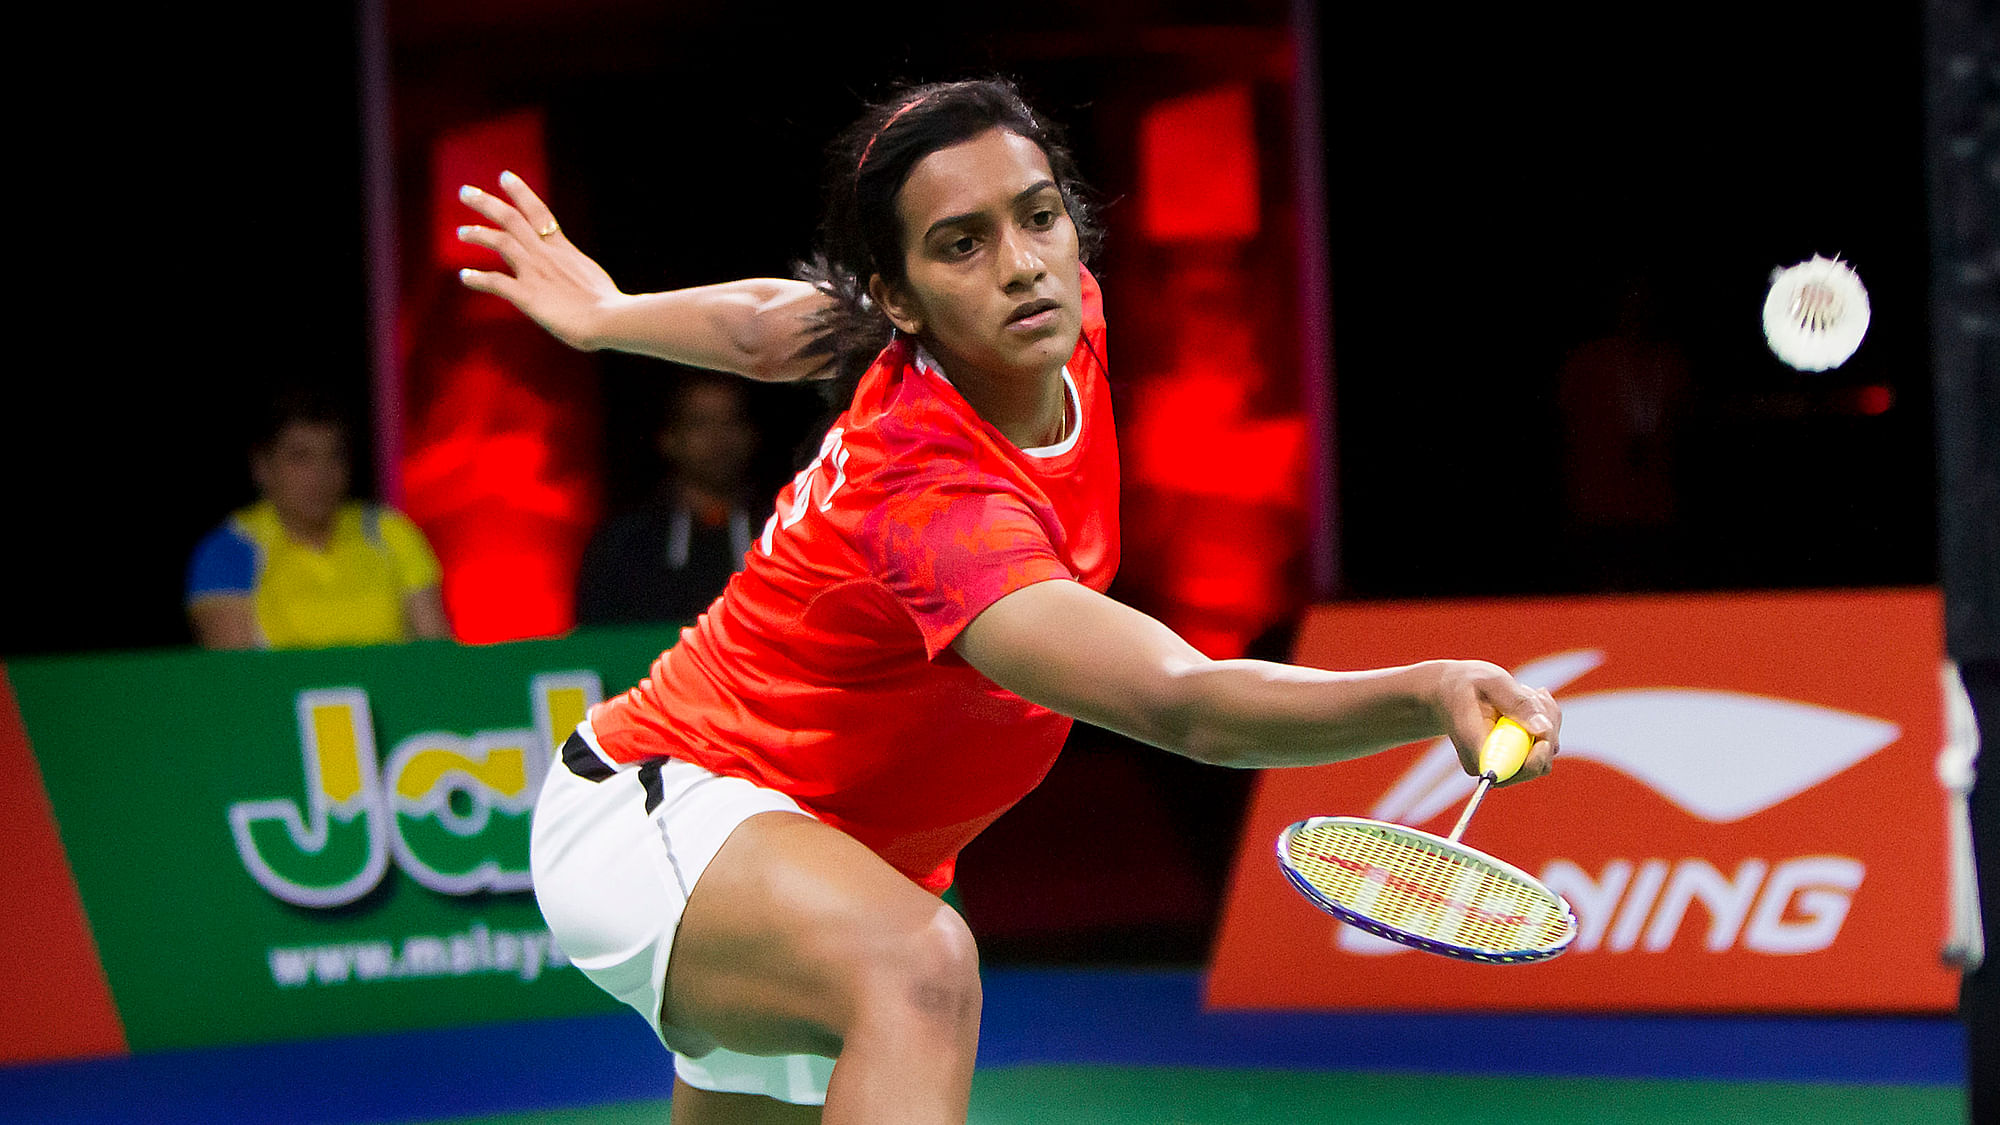 Indian shuttler PV Sindhu was knocked out in the opening round of the All England Open Badminton Championships.